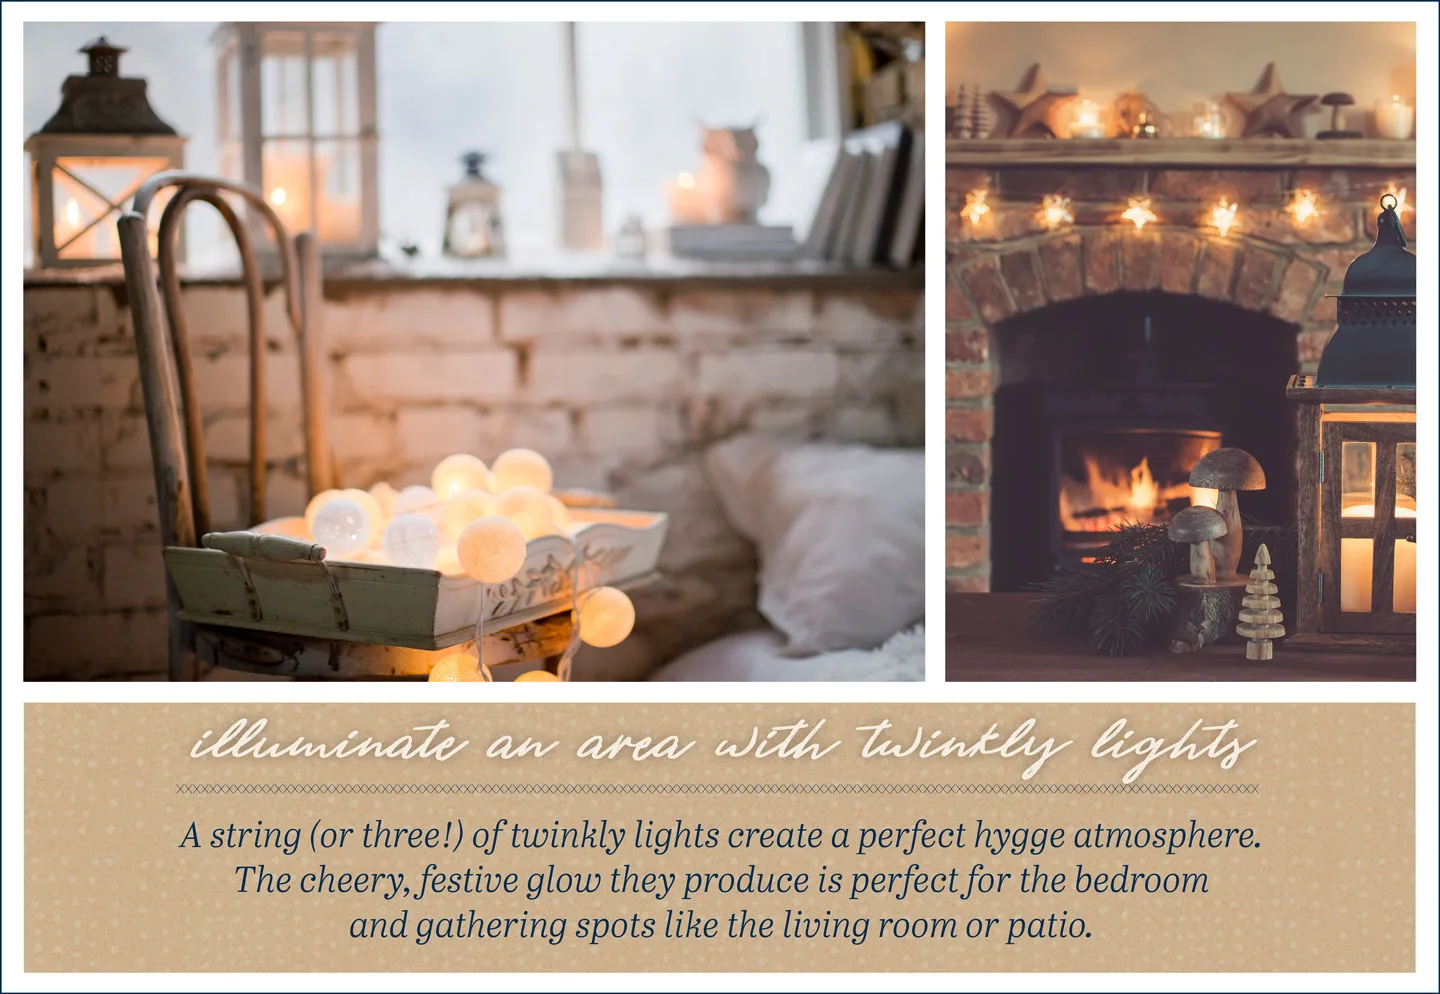 7 Tips to Hygge Your Home: The Do’s and Don’ts of Hygge Decor